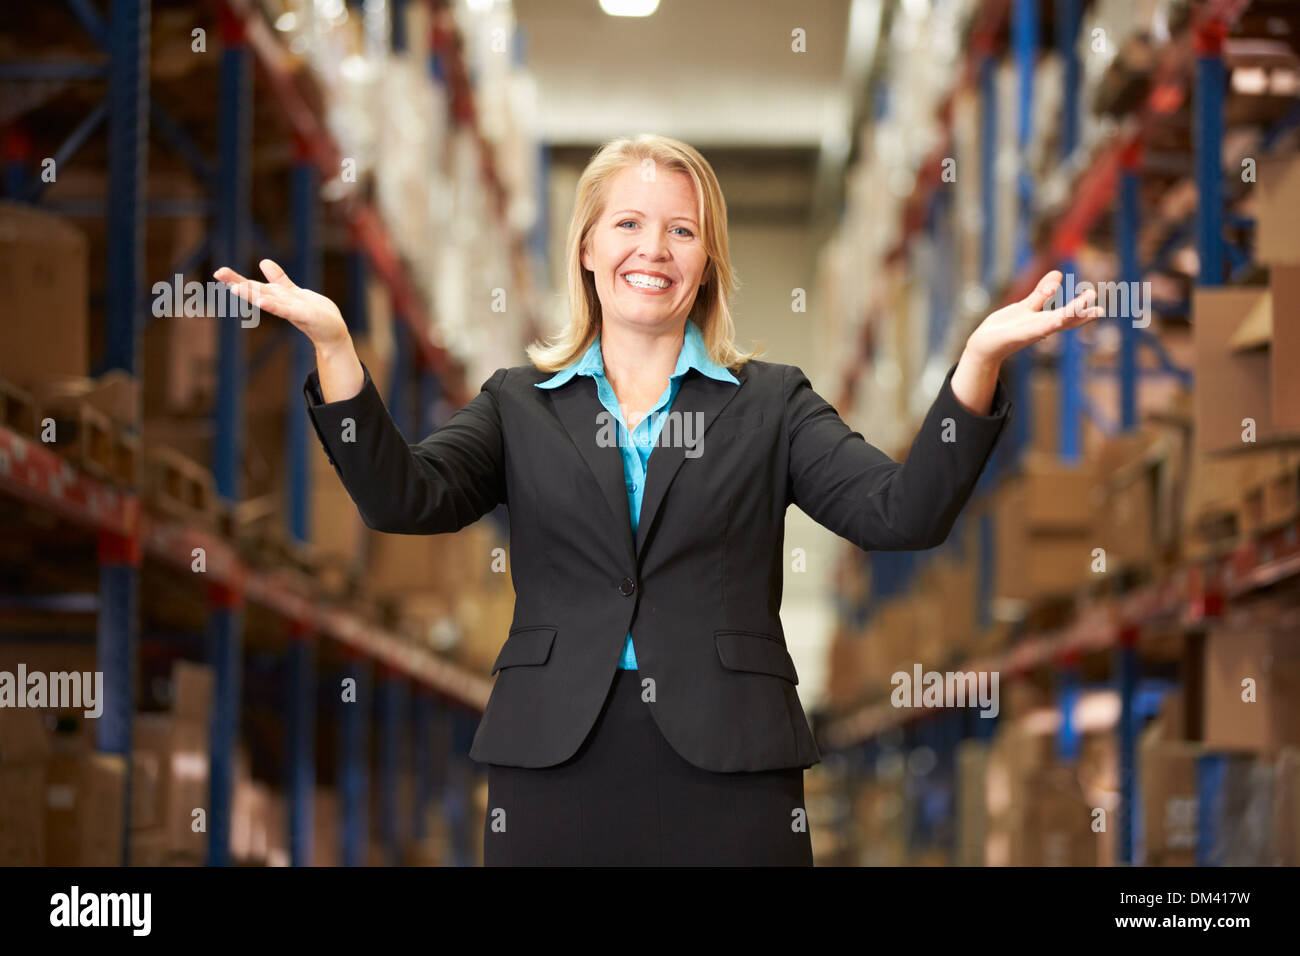 Portrait Of Female Manager In Warehouse Stock Photo